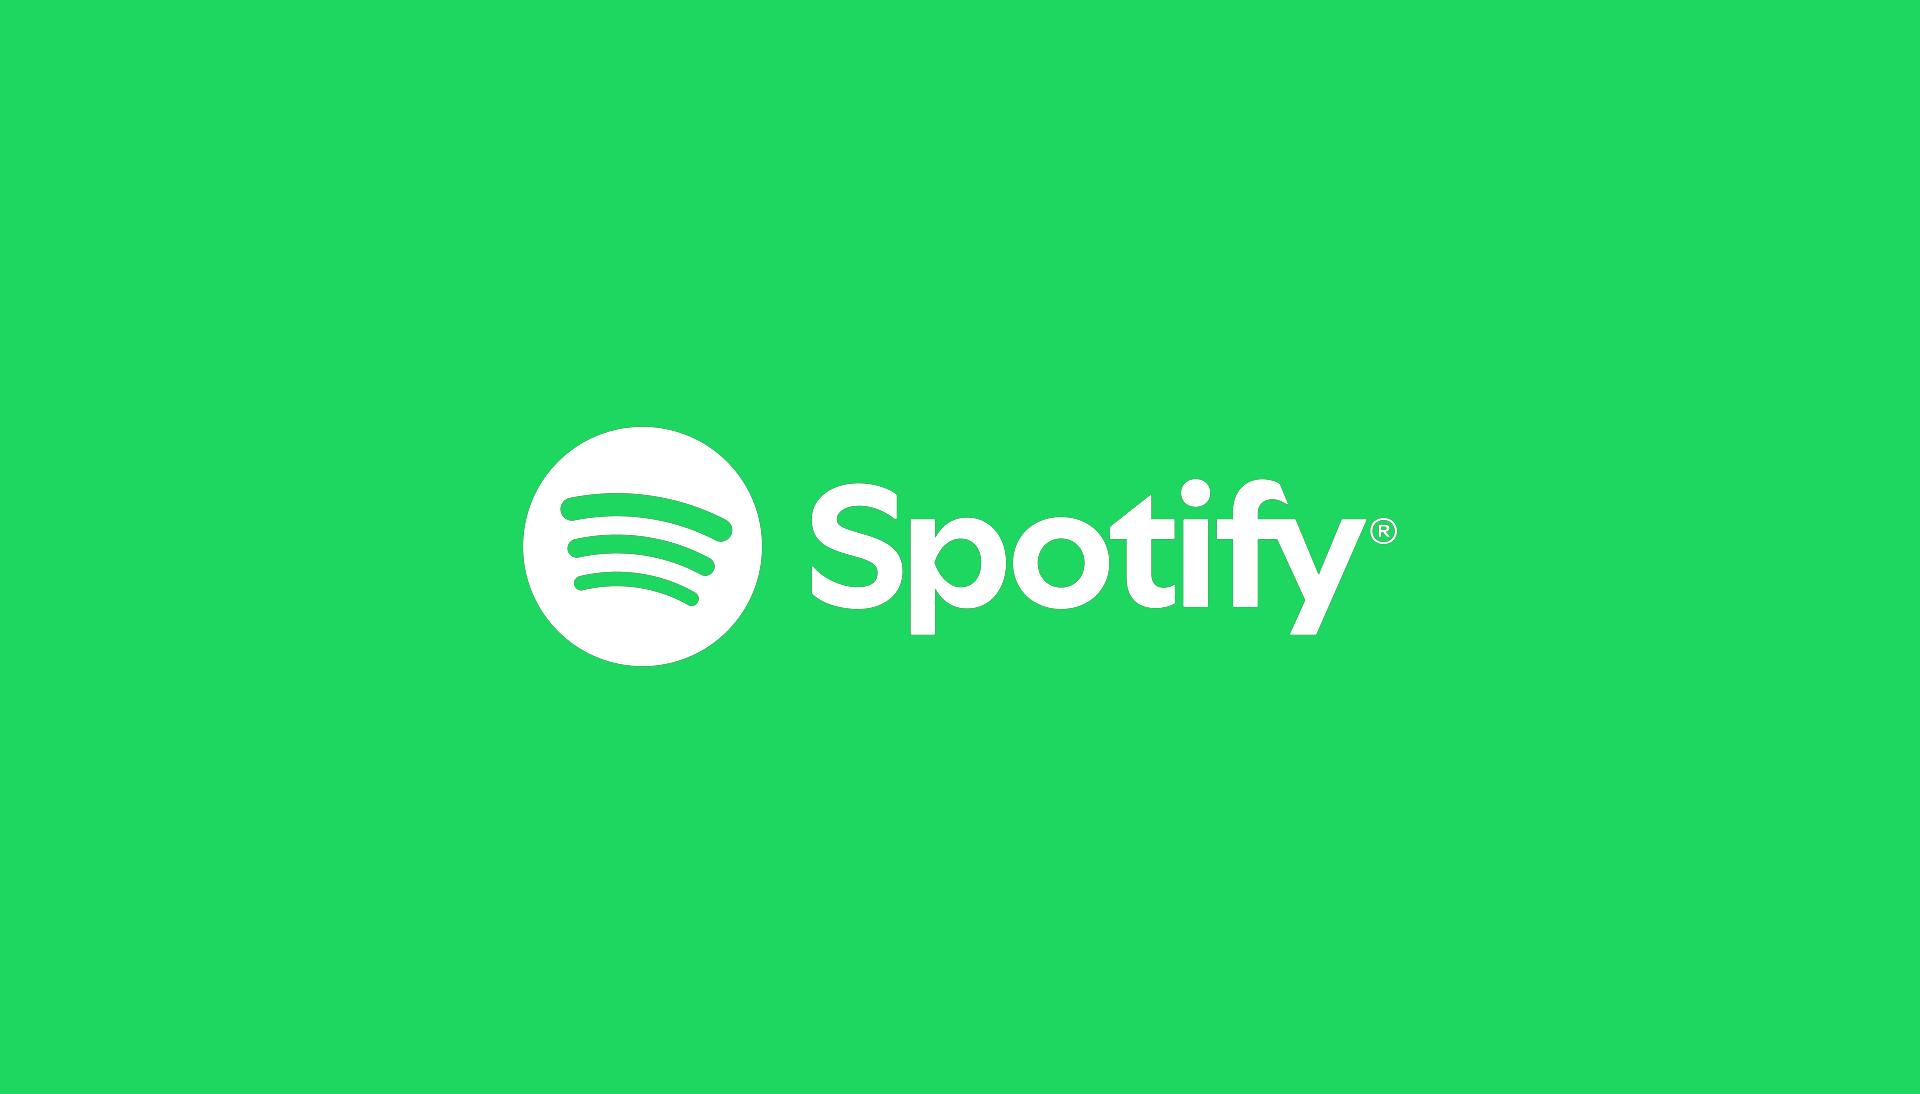 Spotify logo: White text on a green background next to white circle with three lines.